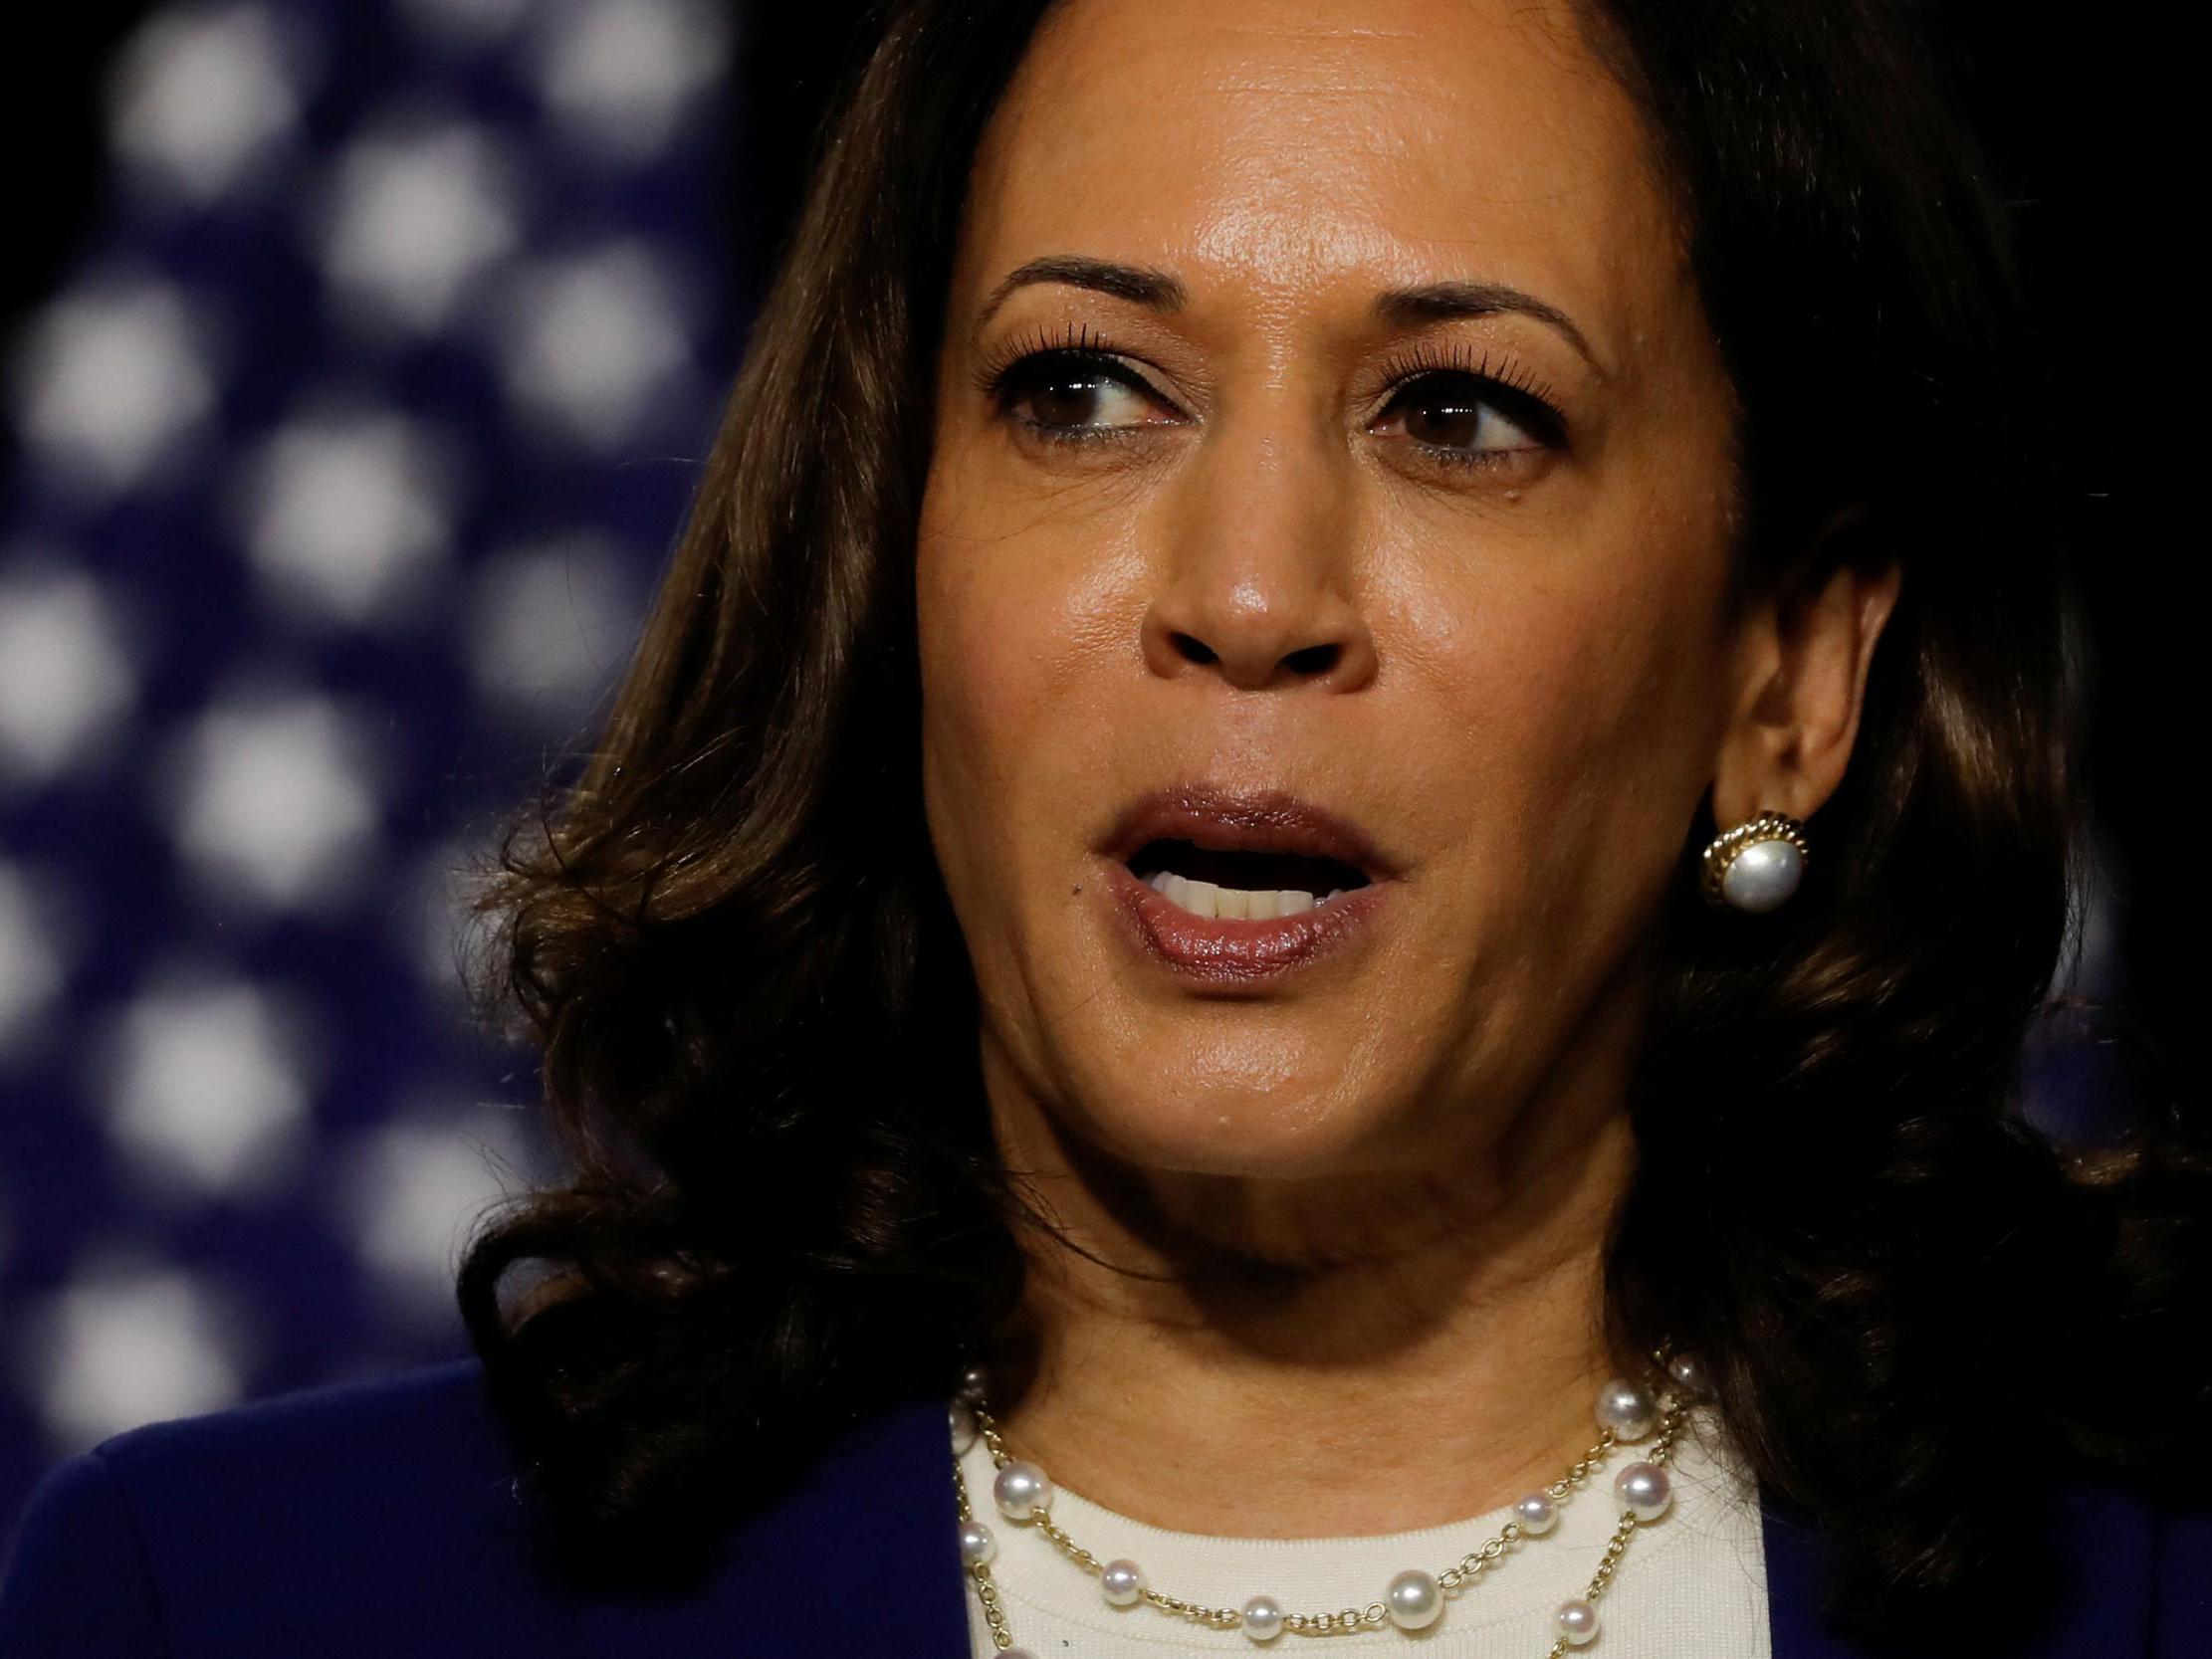 Kamala Harris responds after Trump promotes racist birther conspiracy: 'They're going to engage in lies'